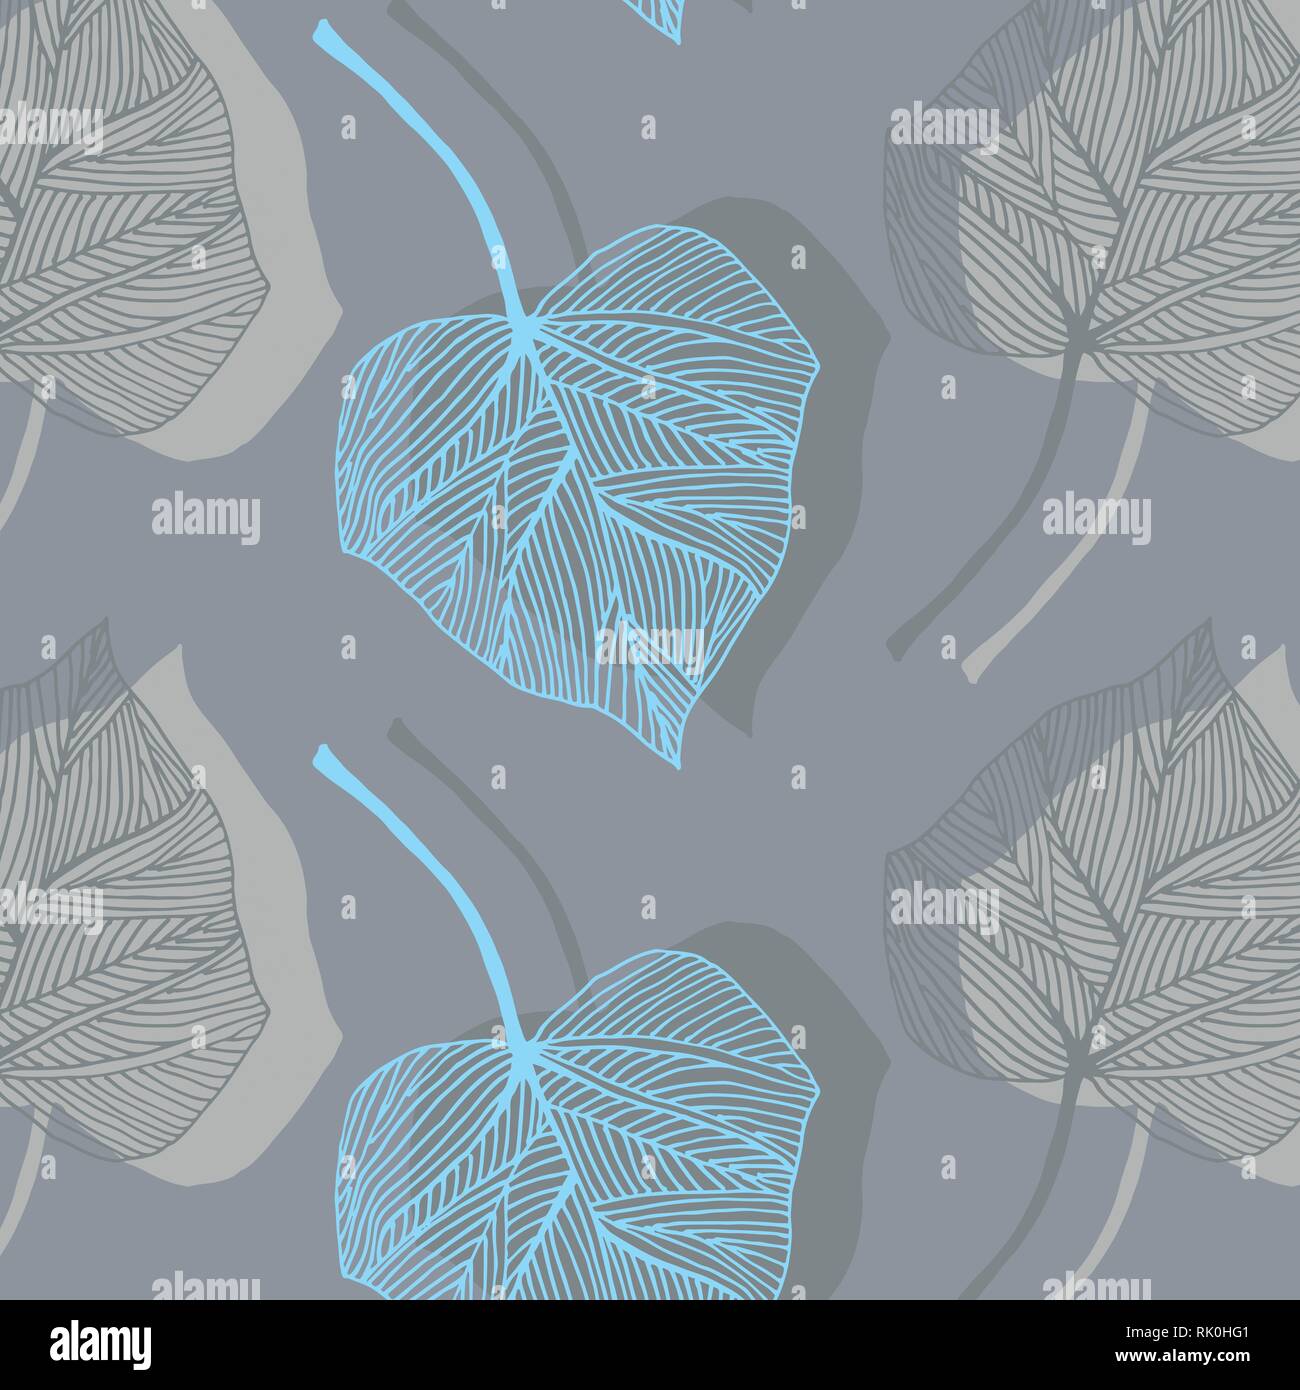 Ivy leaves vector pattern in gray and turquoise blue colors palette on a gray background Stock Vector